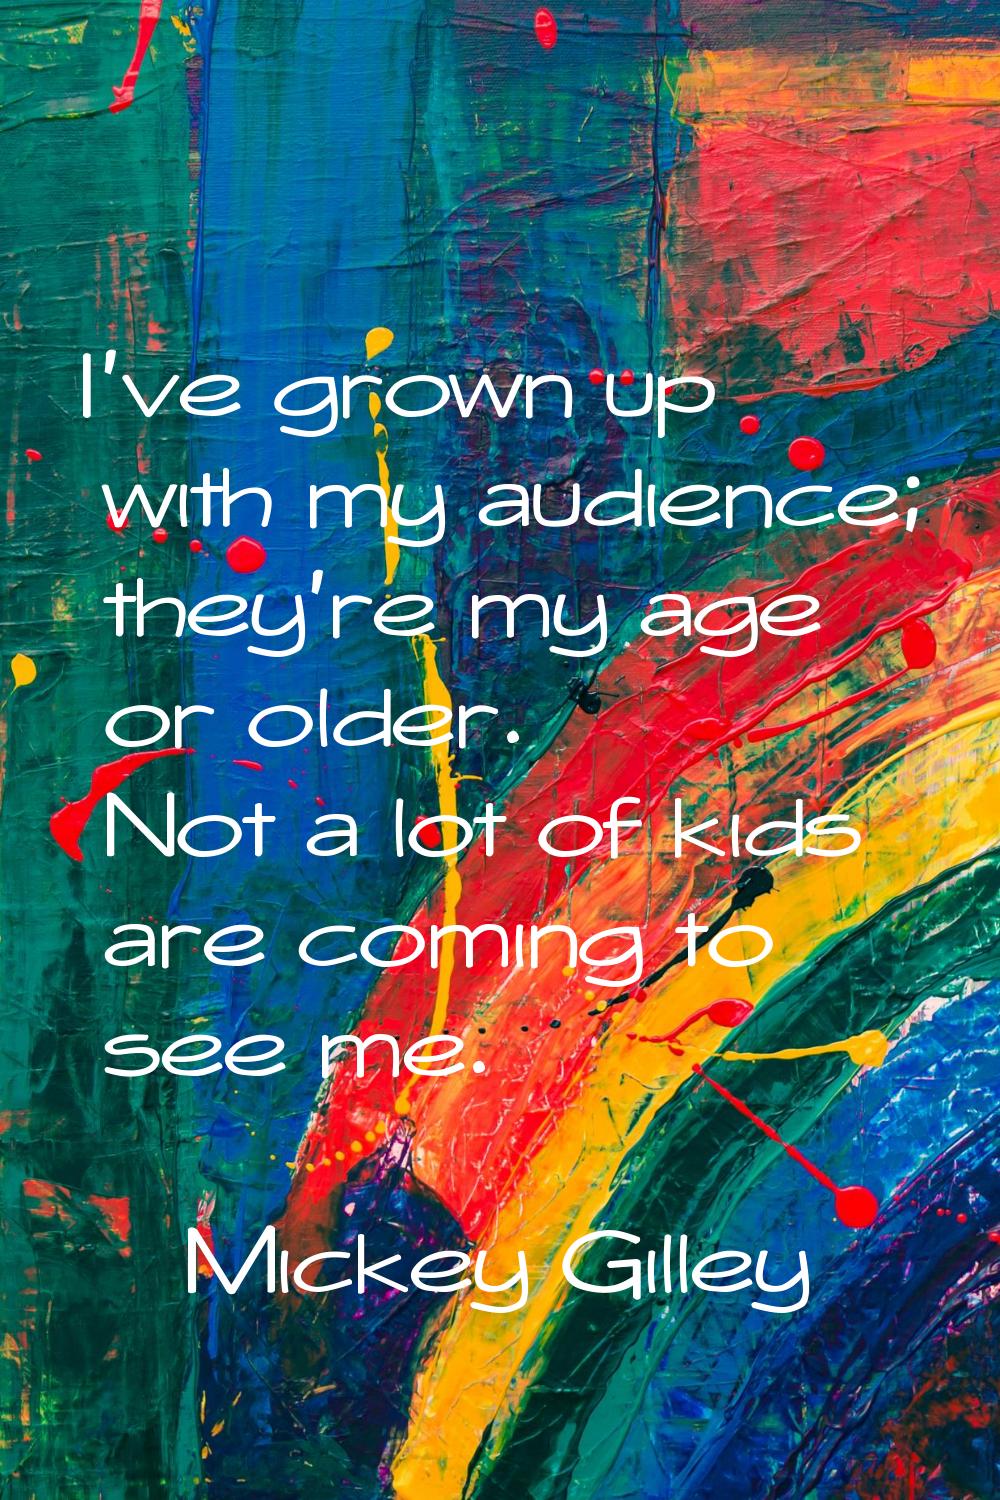 I've grown up with my audience; they're my age or older. Not a lot of kids are coming to see me.